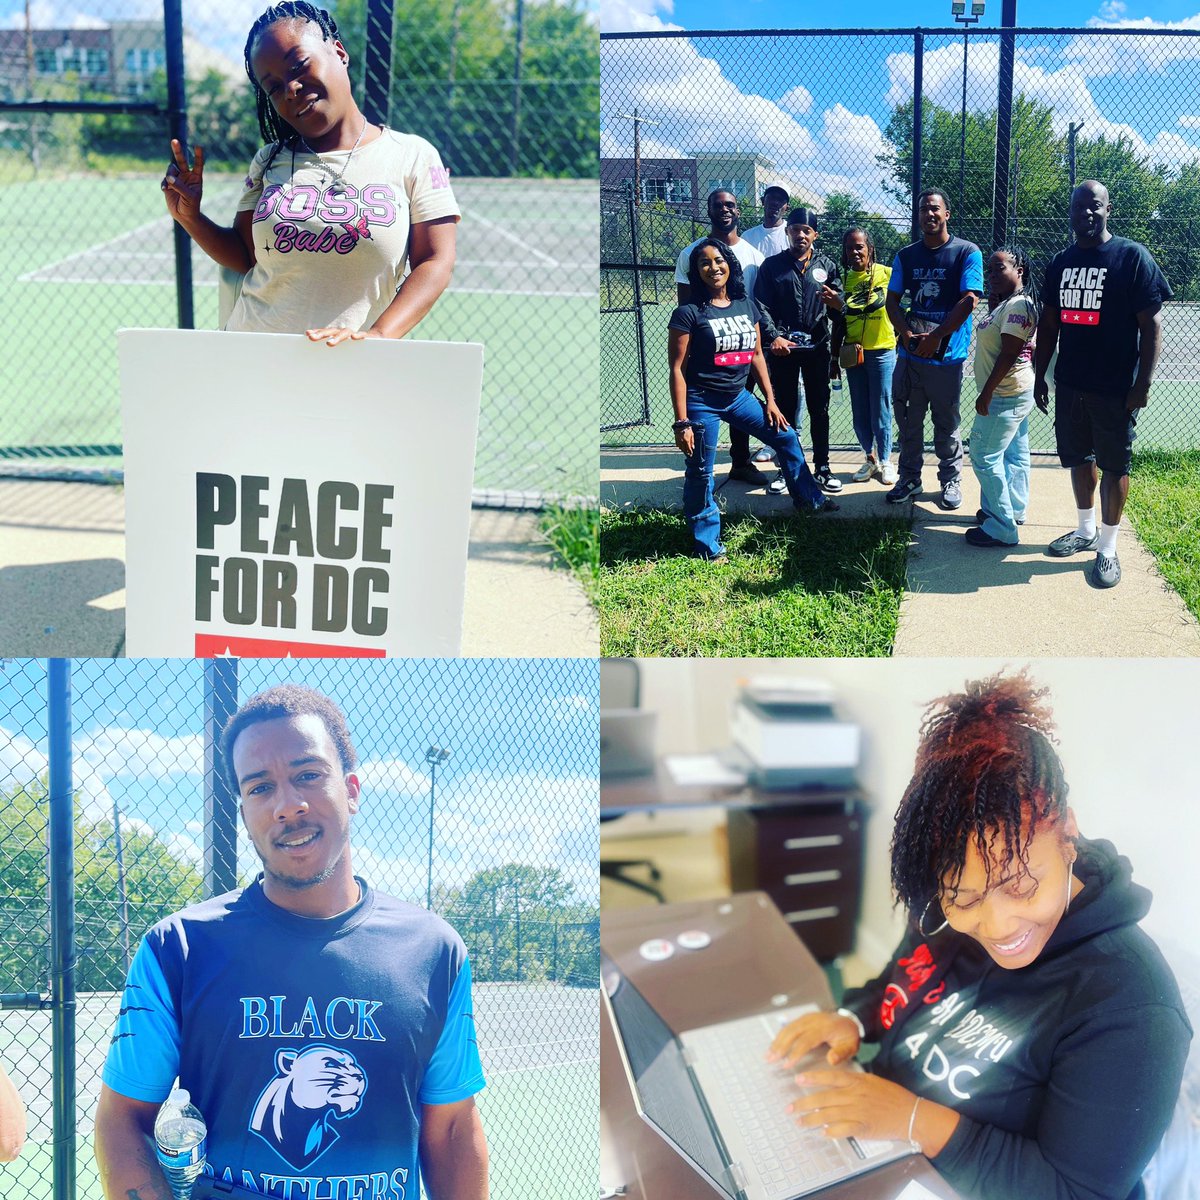 #DCPeaceAcademy is back! We are SO excited to welcome Cohort 5 this week for small group orientation & computer classes. Thanks to #DigitalLiberations @ServeYourCityDC/#Ward6MutualAid for chromebooks & digital literacy classes & to our amazing #Peace4DC team. #KnowledgeIsPower 📚